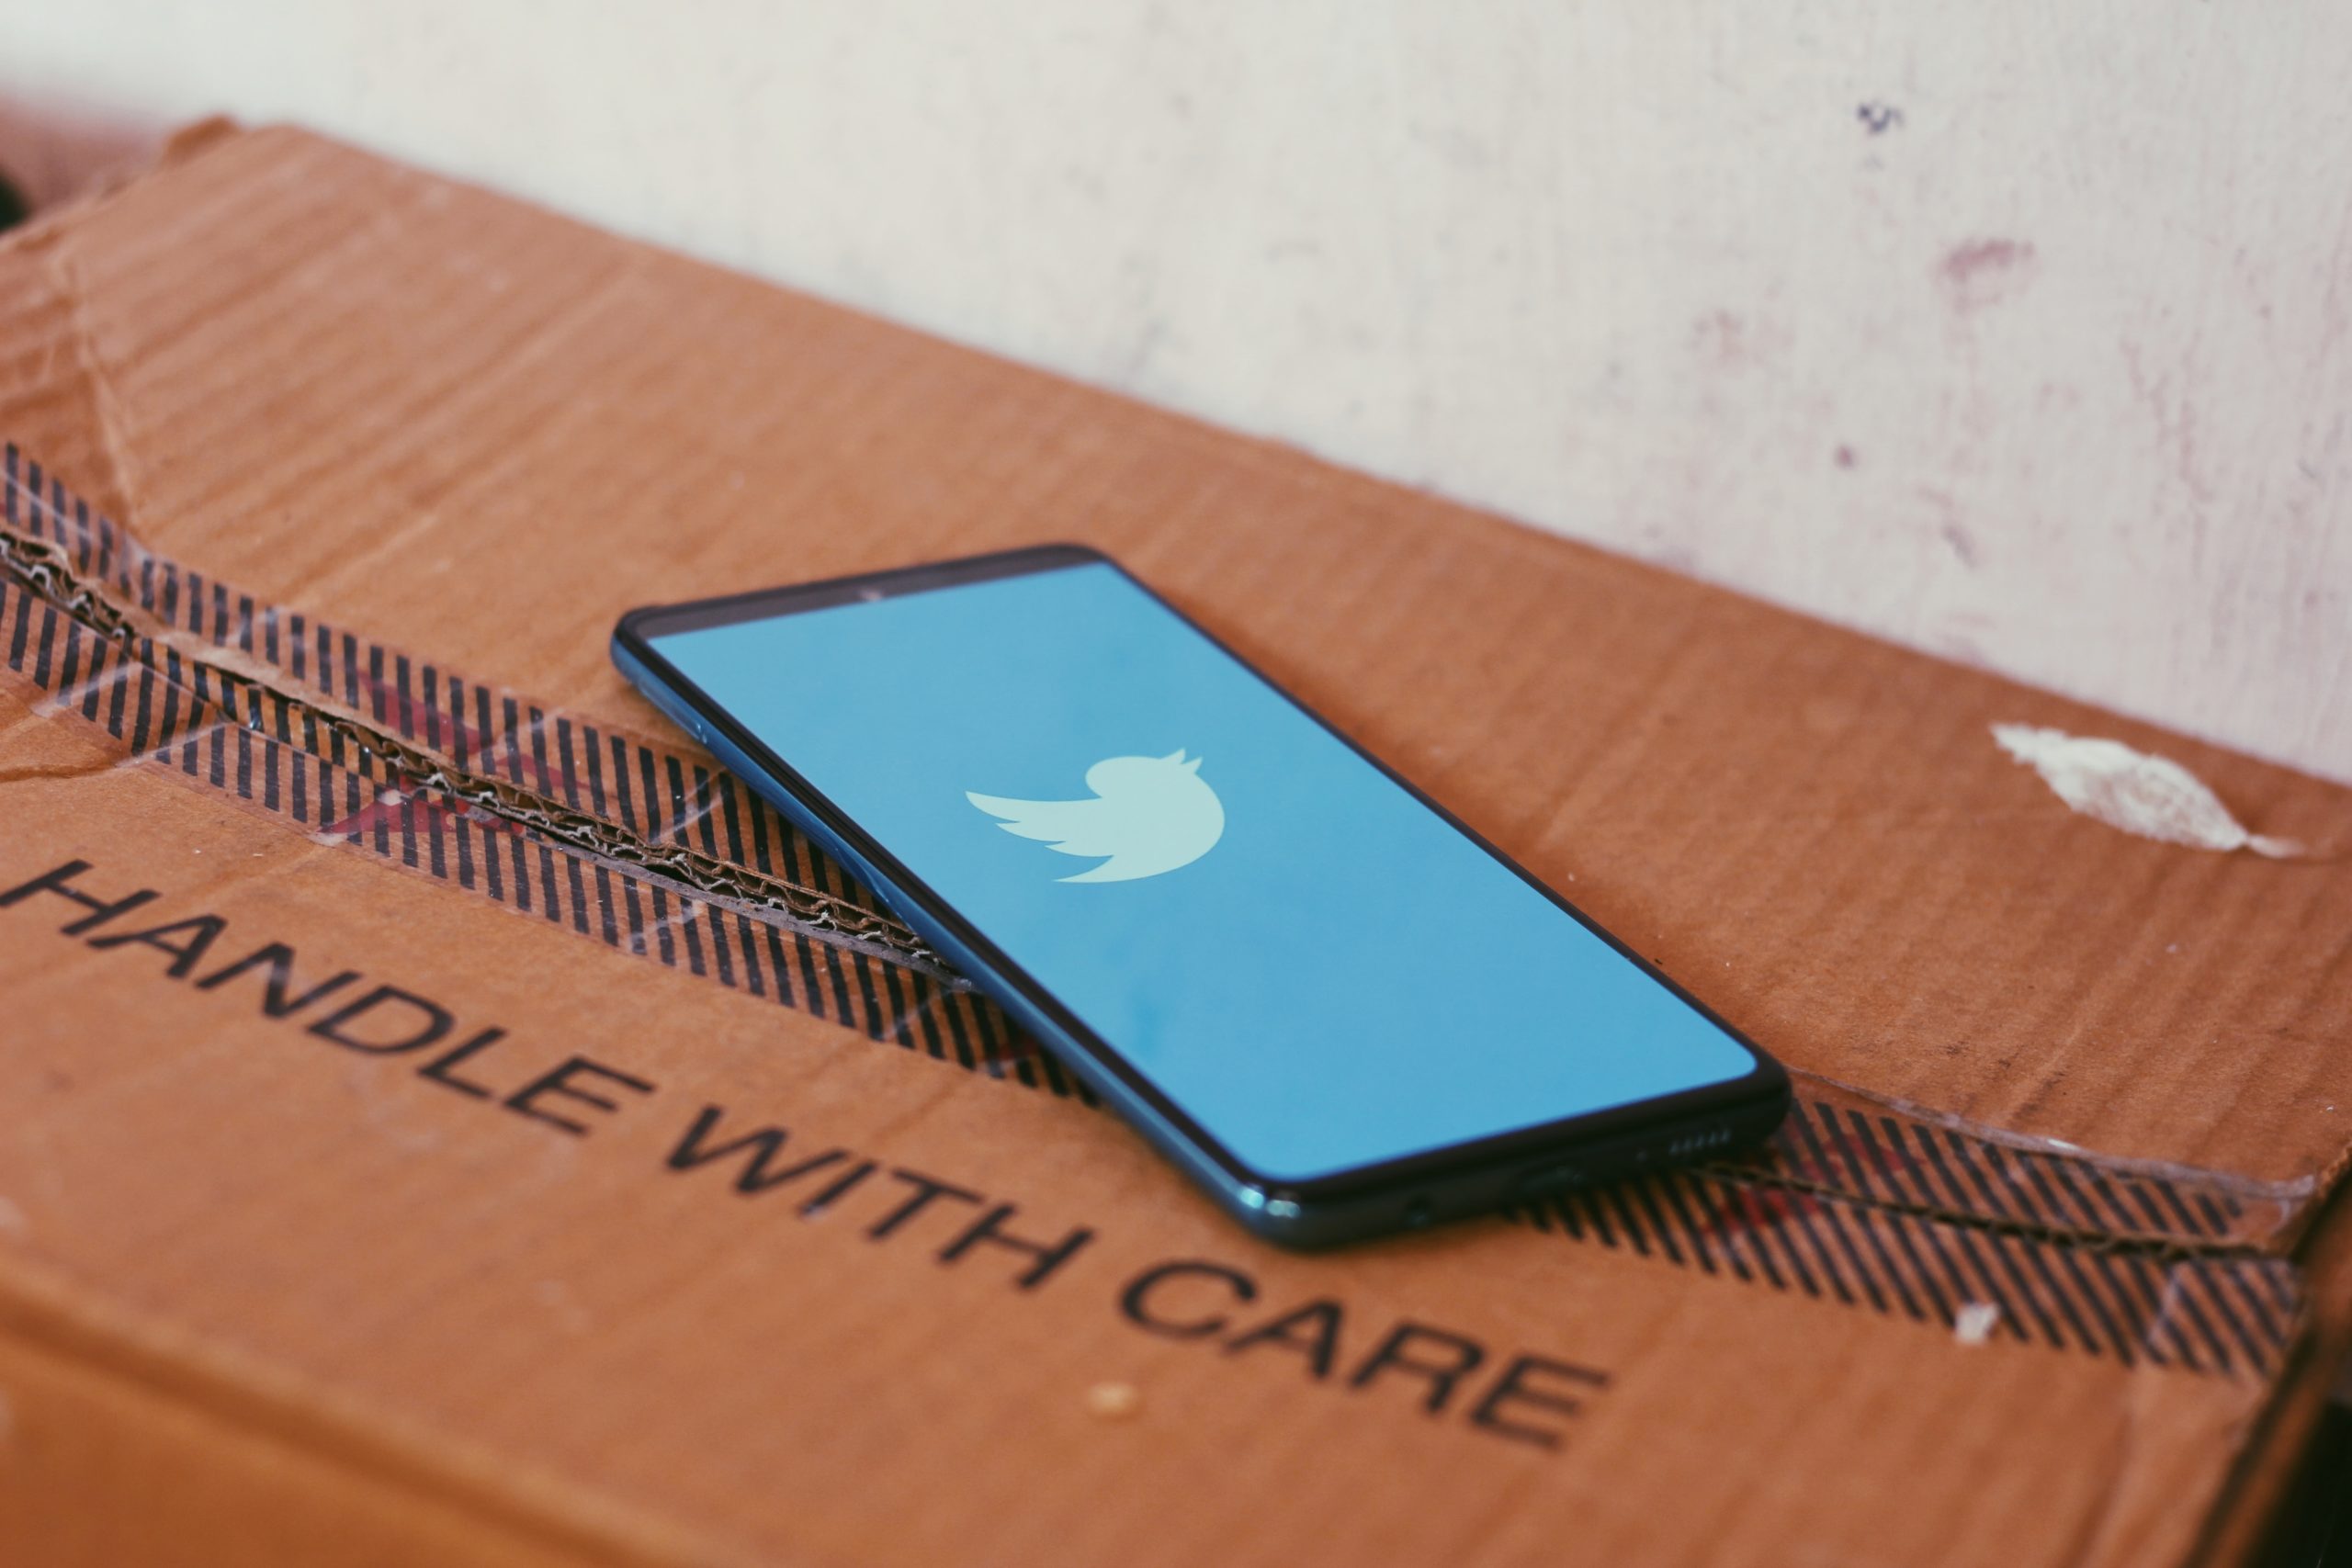 A smartphone with the Twitter logo onscreen, lying on a cardboard box with the words 'Handle with care' on it.